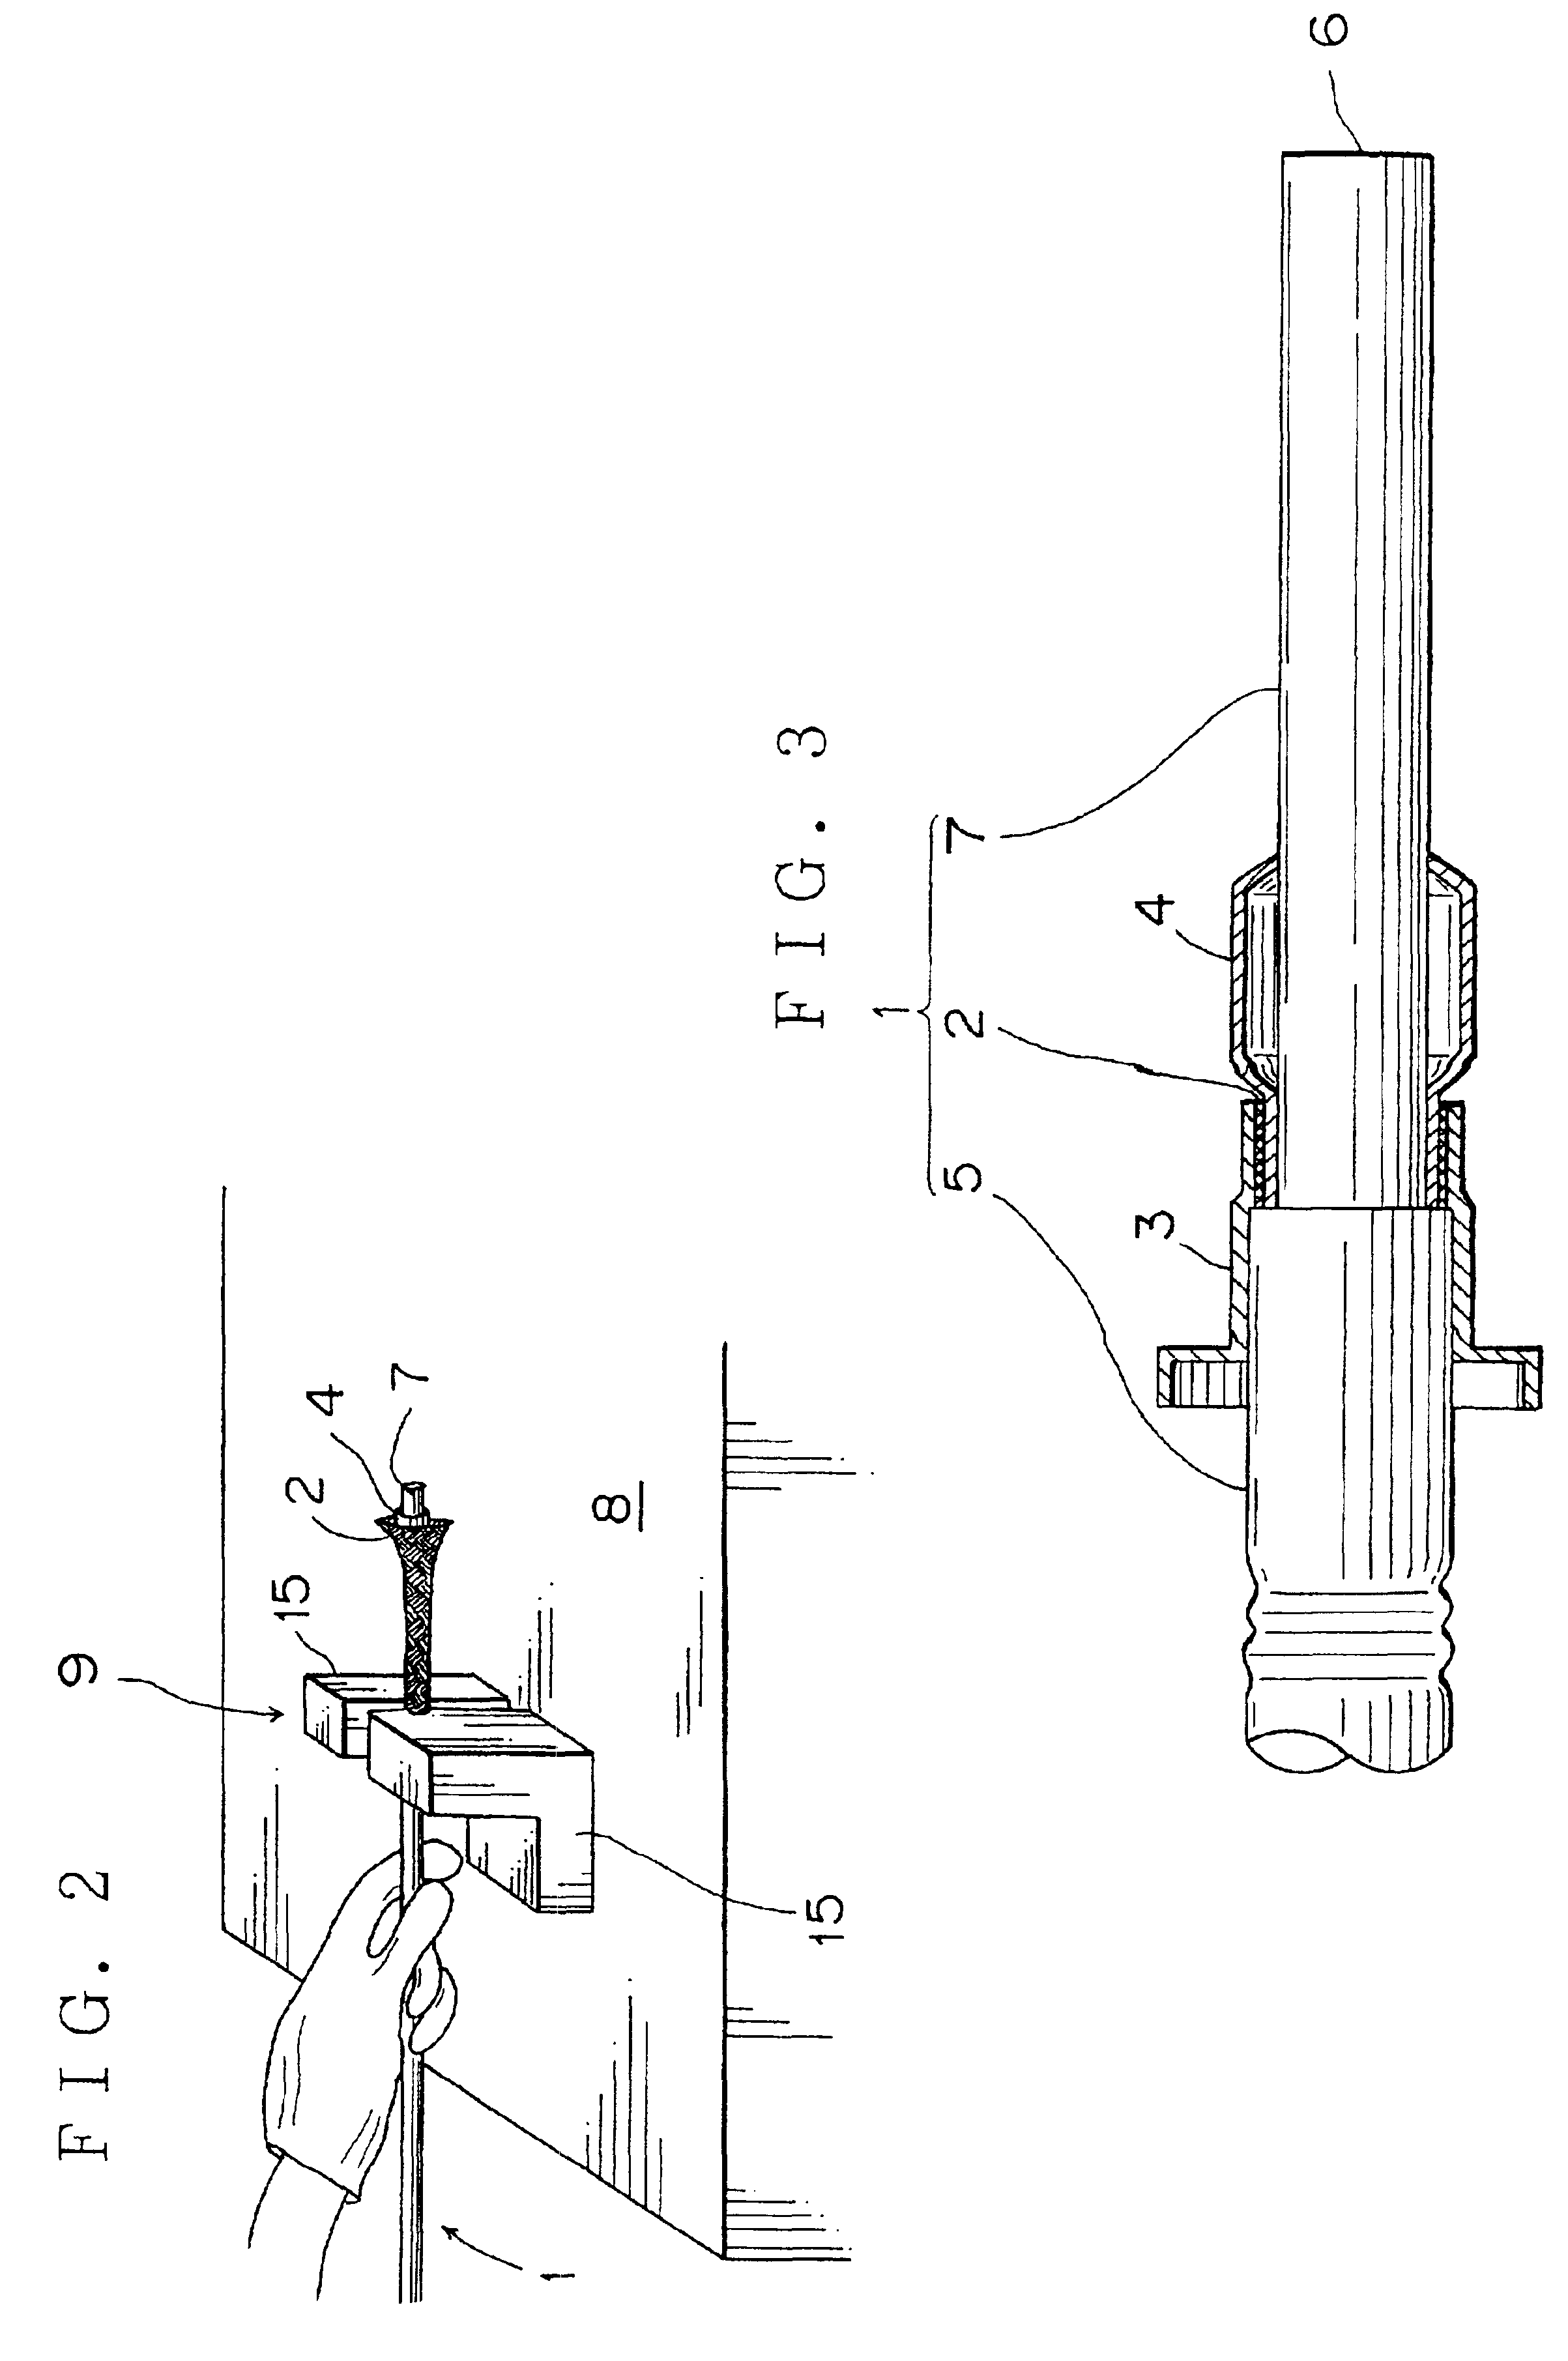 Apparatus for finishing stripped end of shield wire